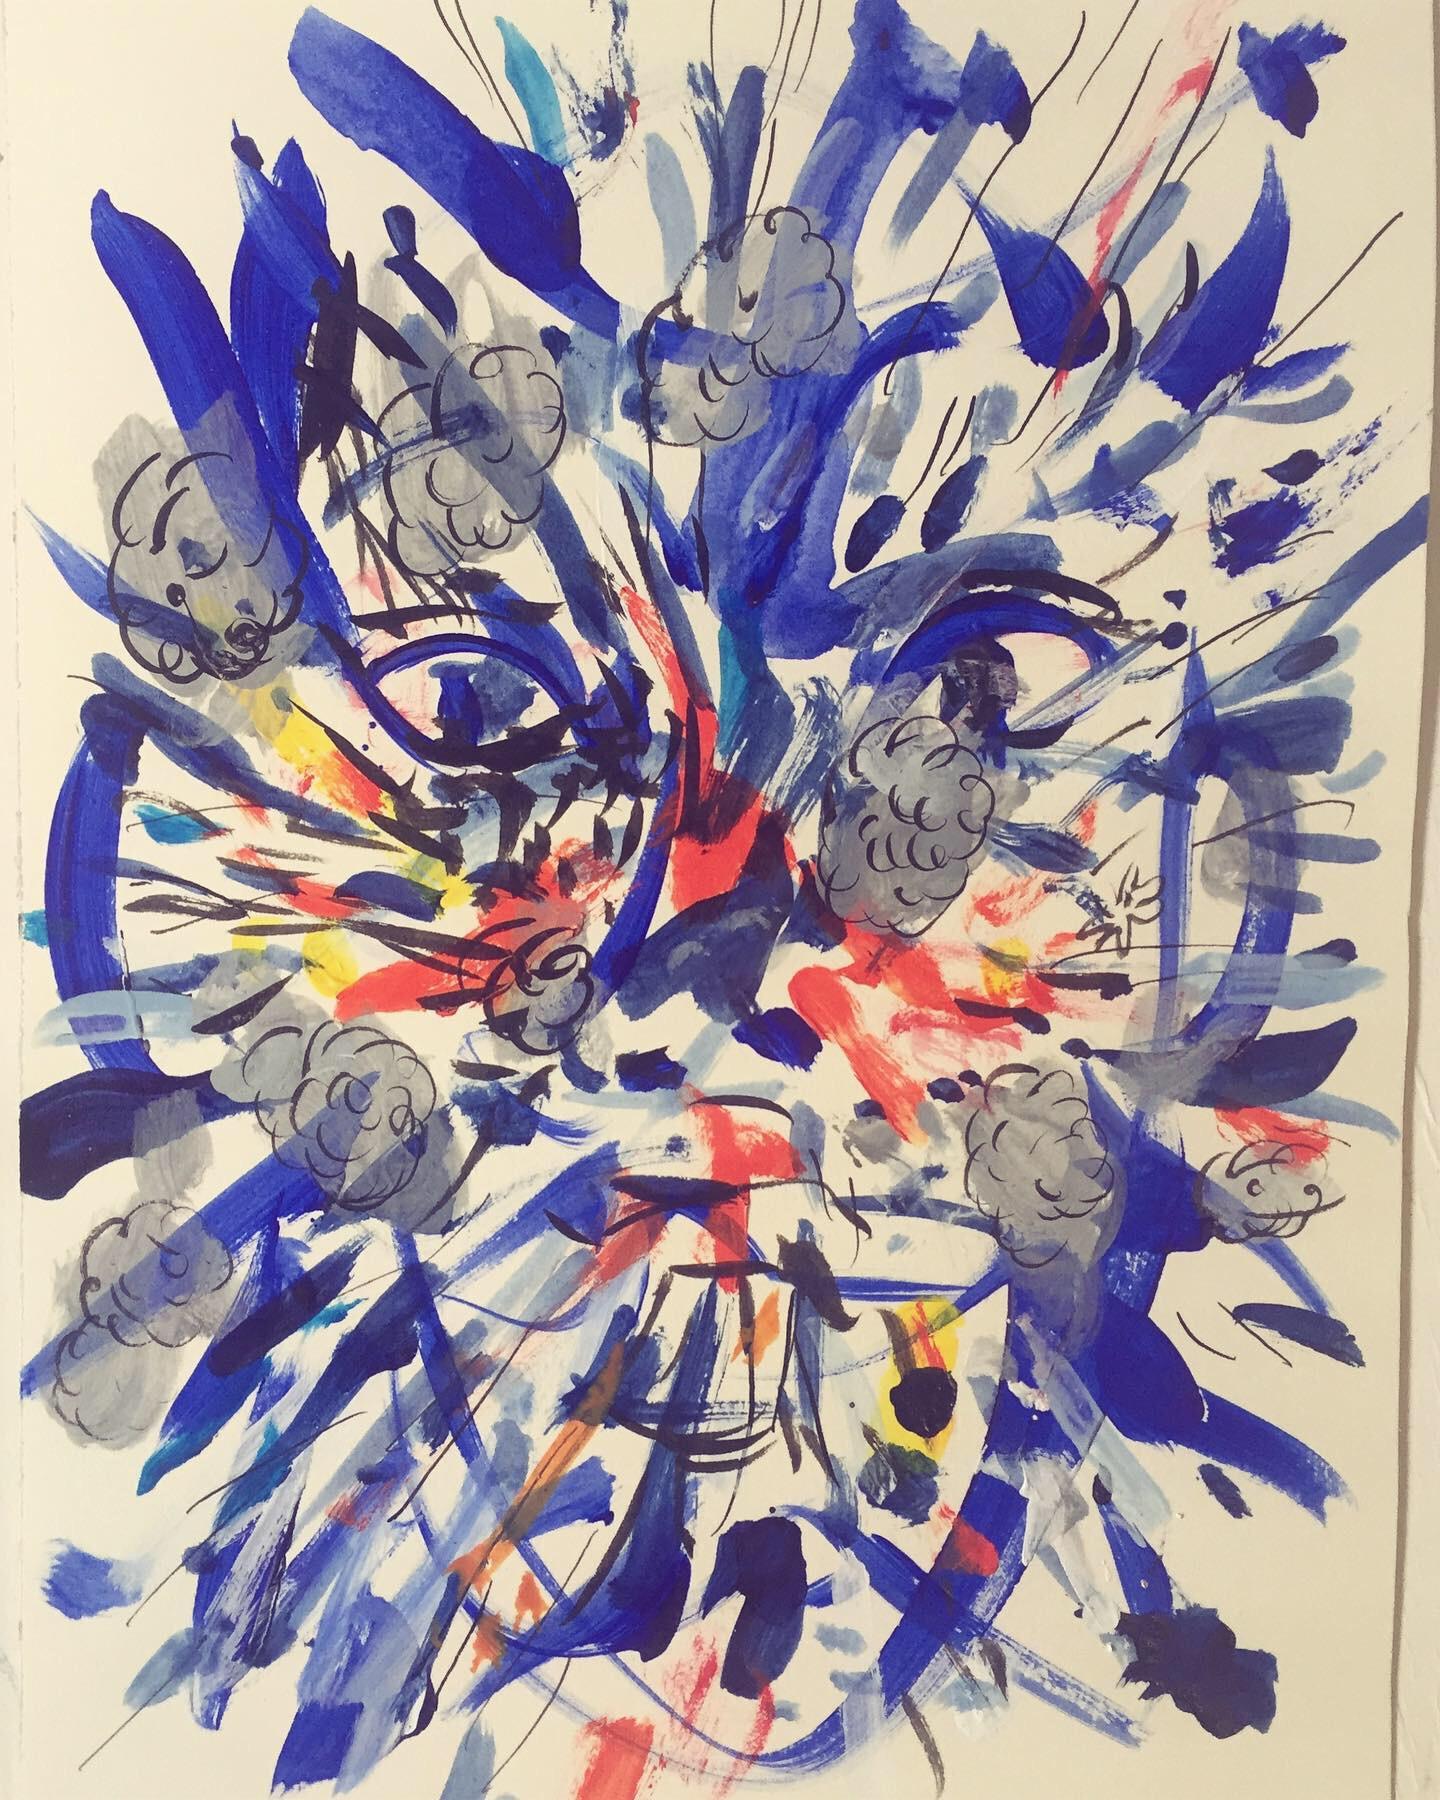 Nina Bovasso Abstract Drawing - Face Explosion 1  (1 of 4 suite) 9x12 inches on paper